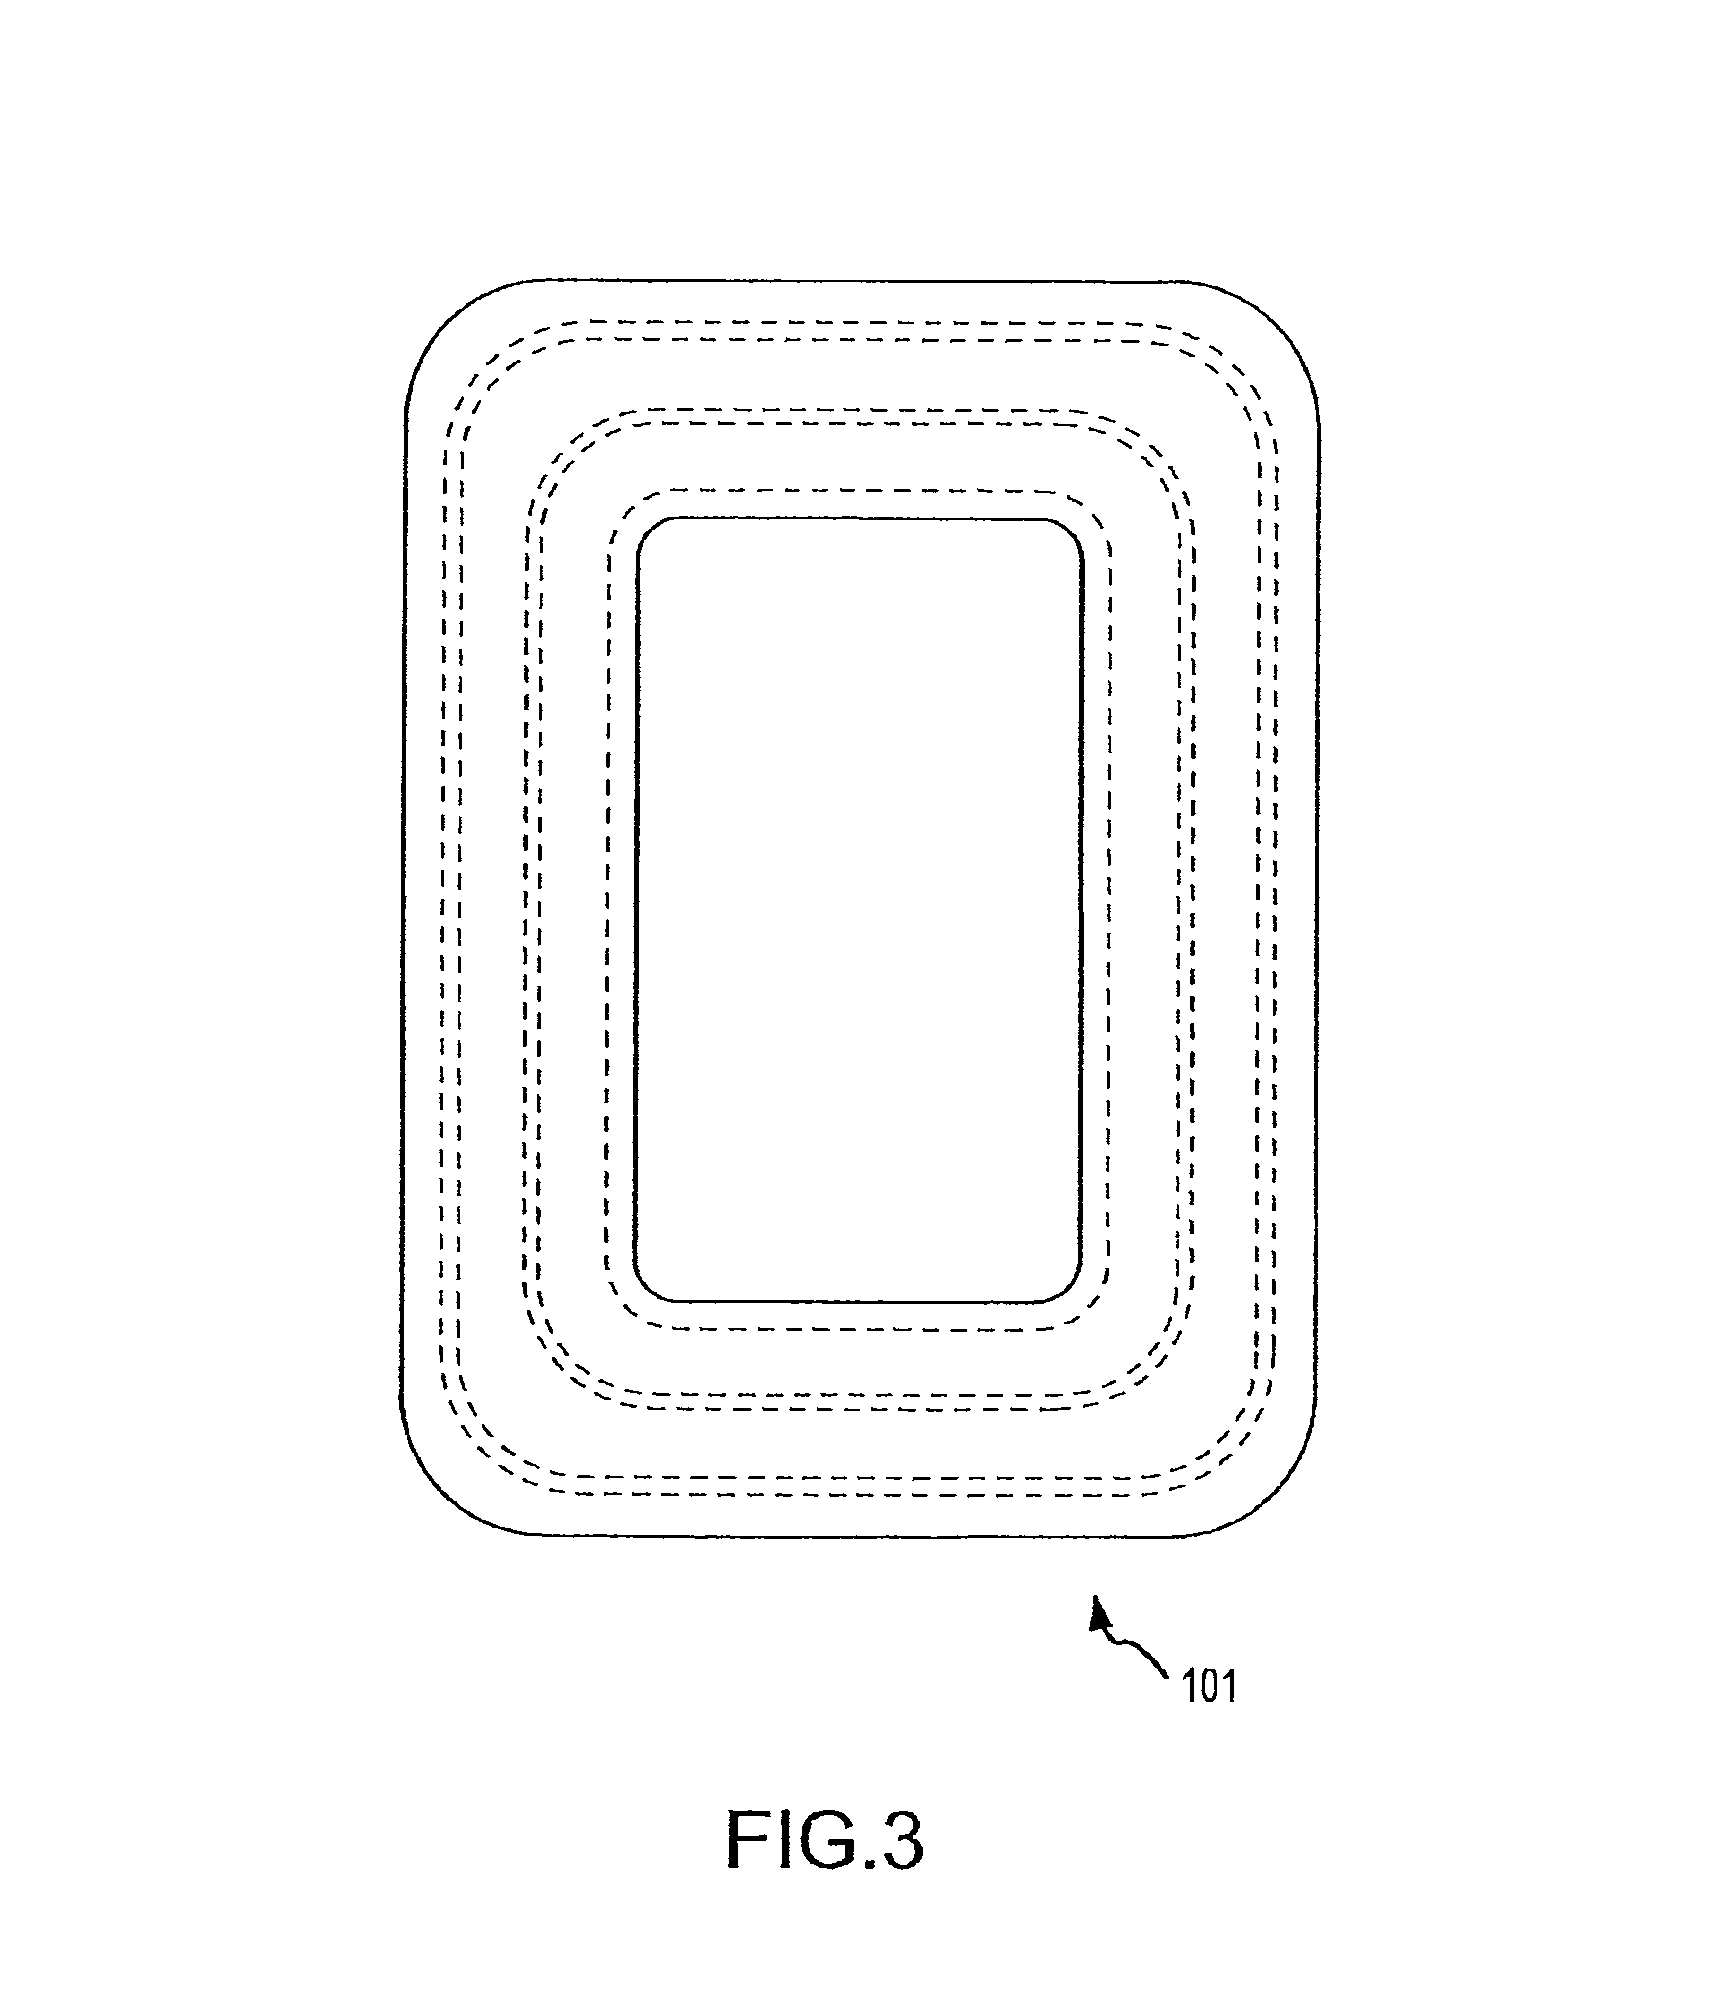 Method of forming container with a tool having an articulated section